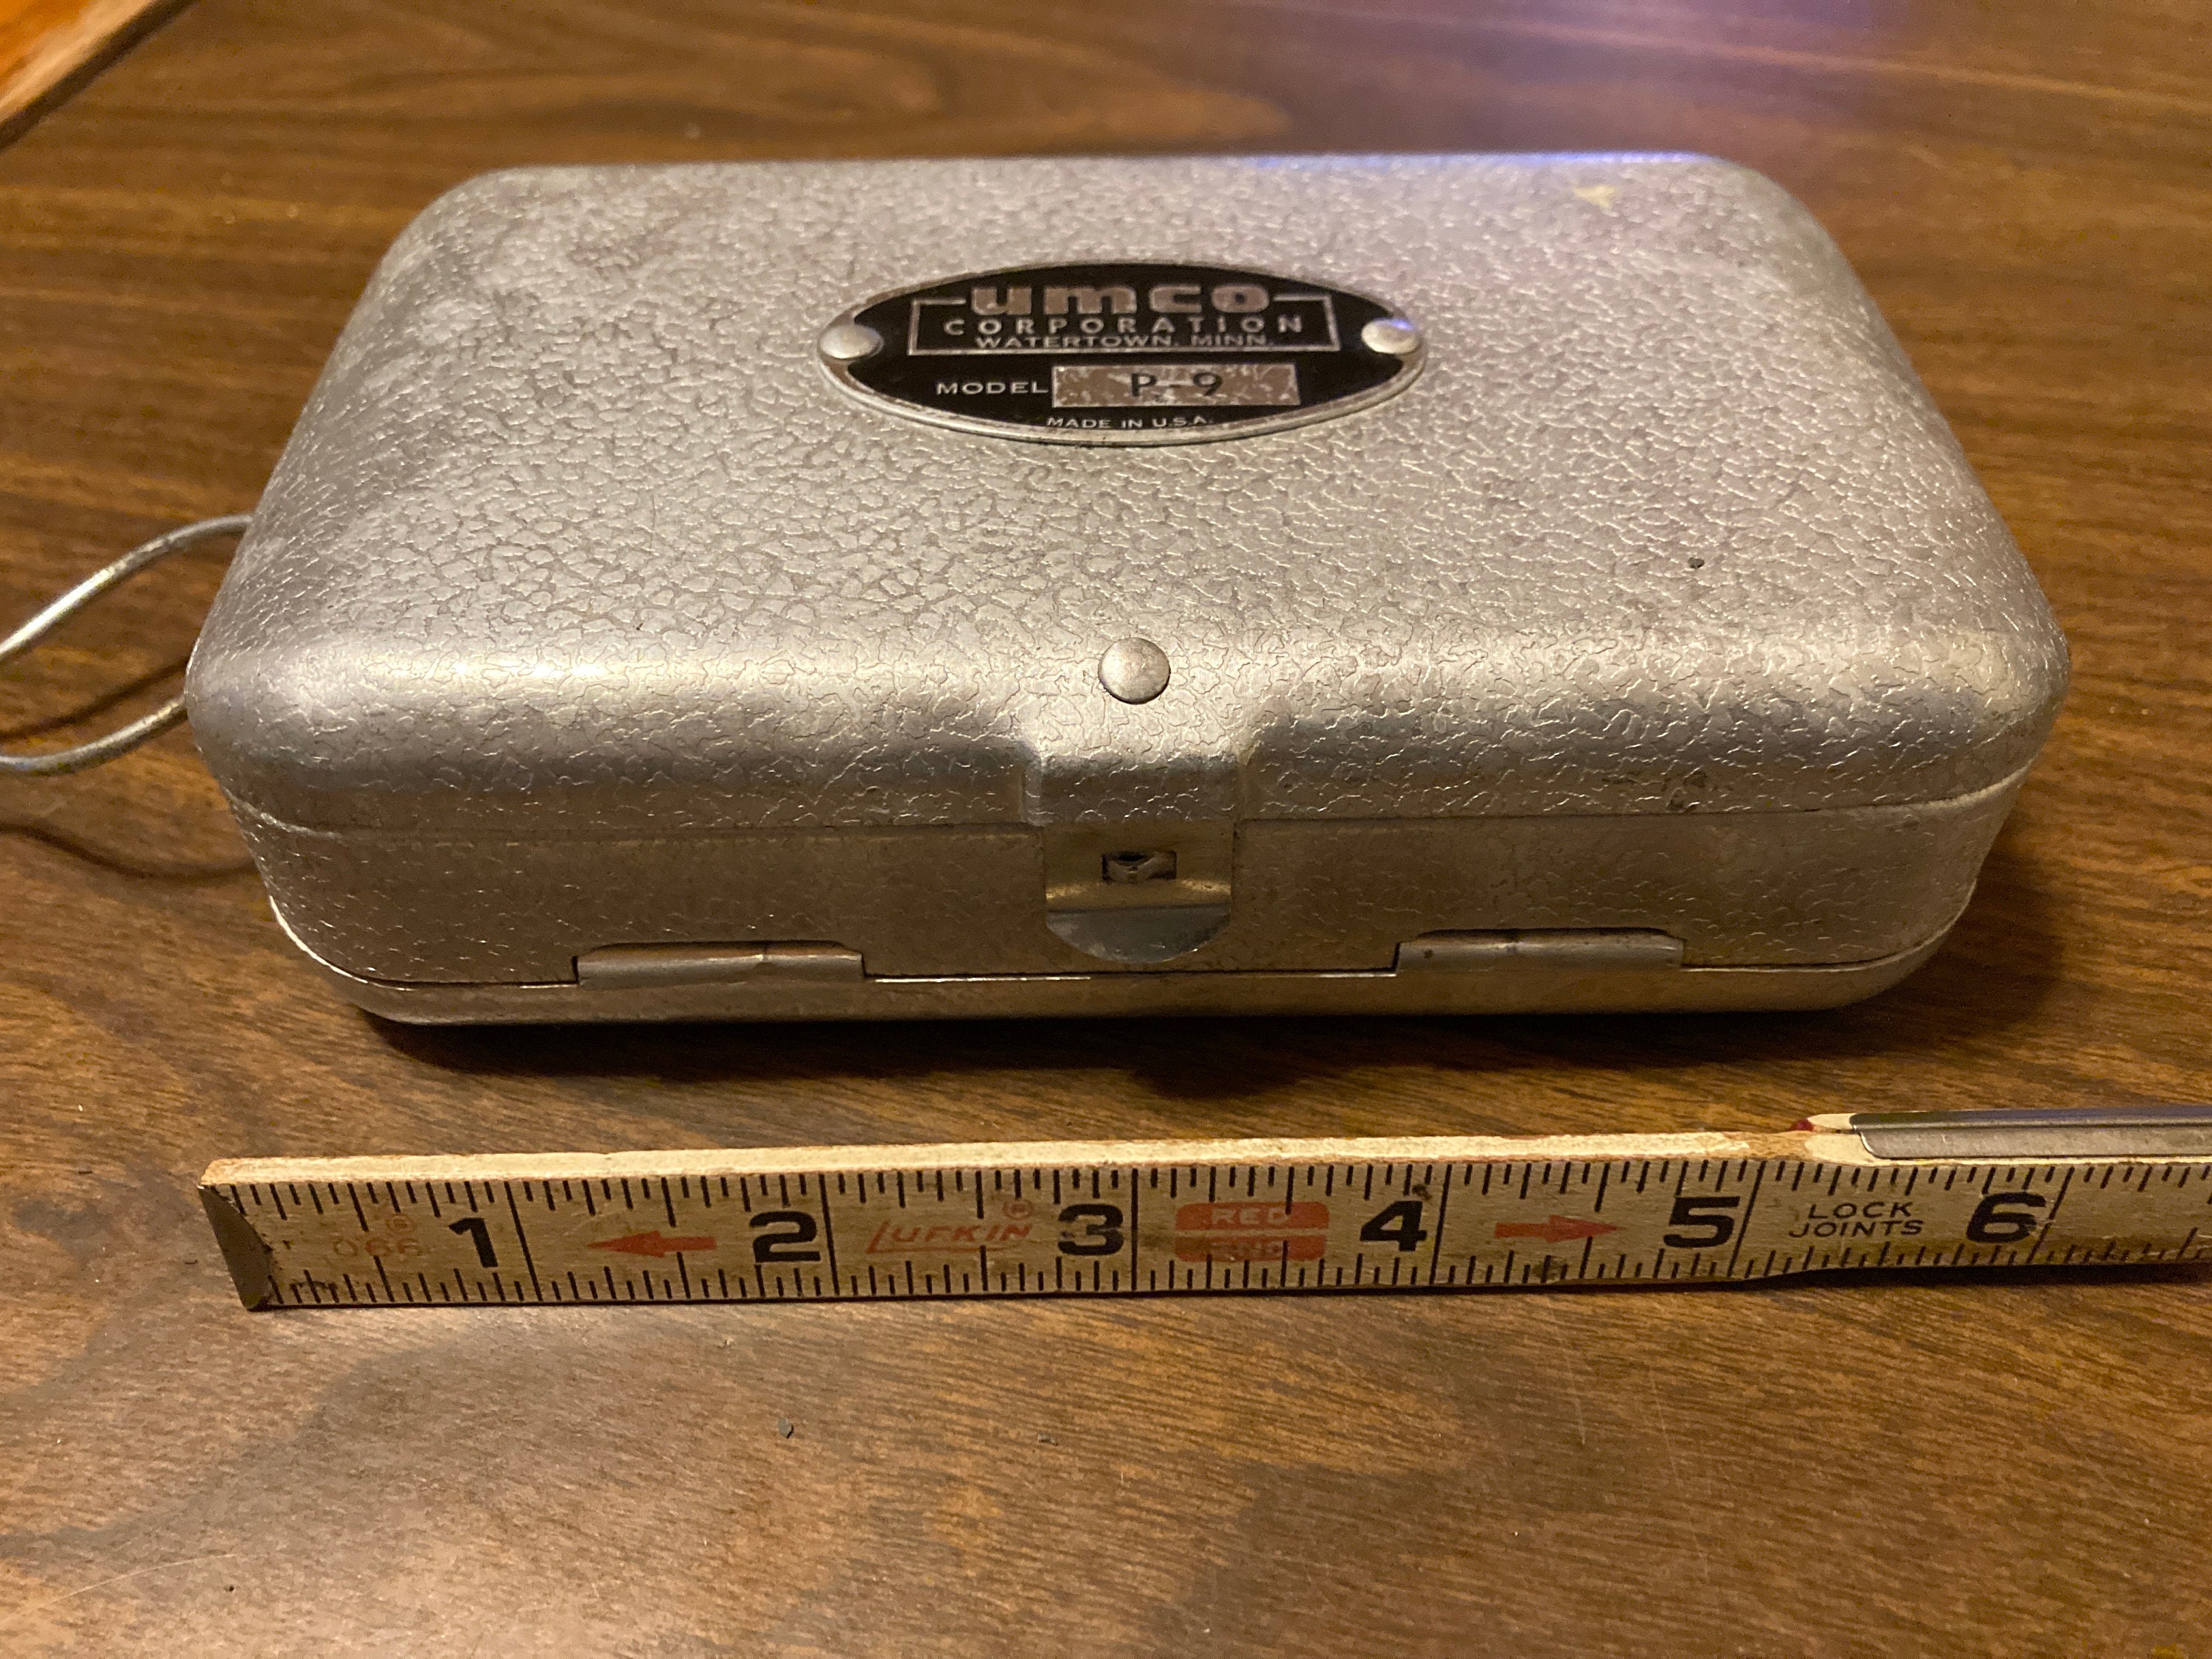 Old Collectable UMCO Tackle Box. Model P9 Fly Fishing Box With